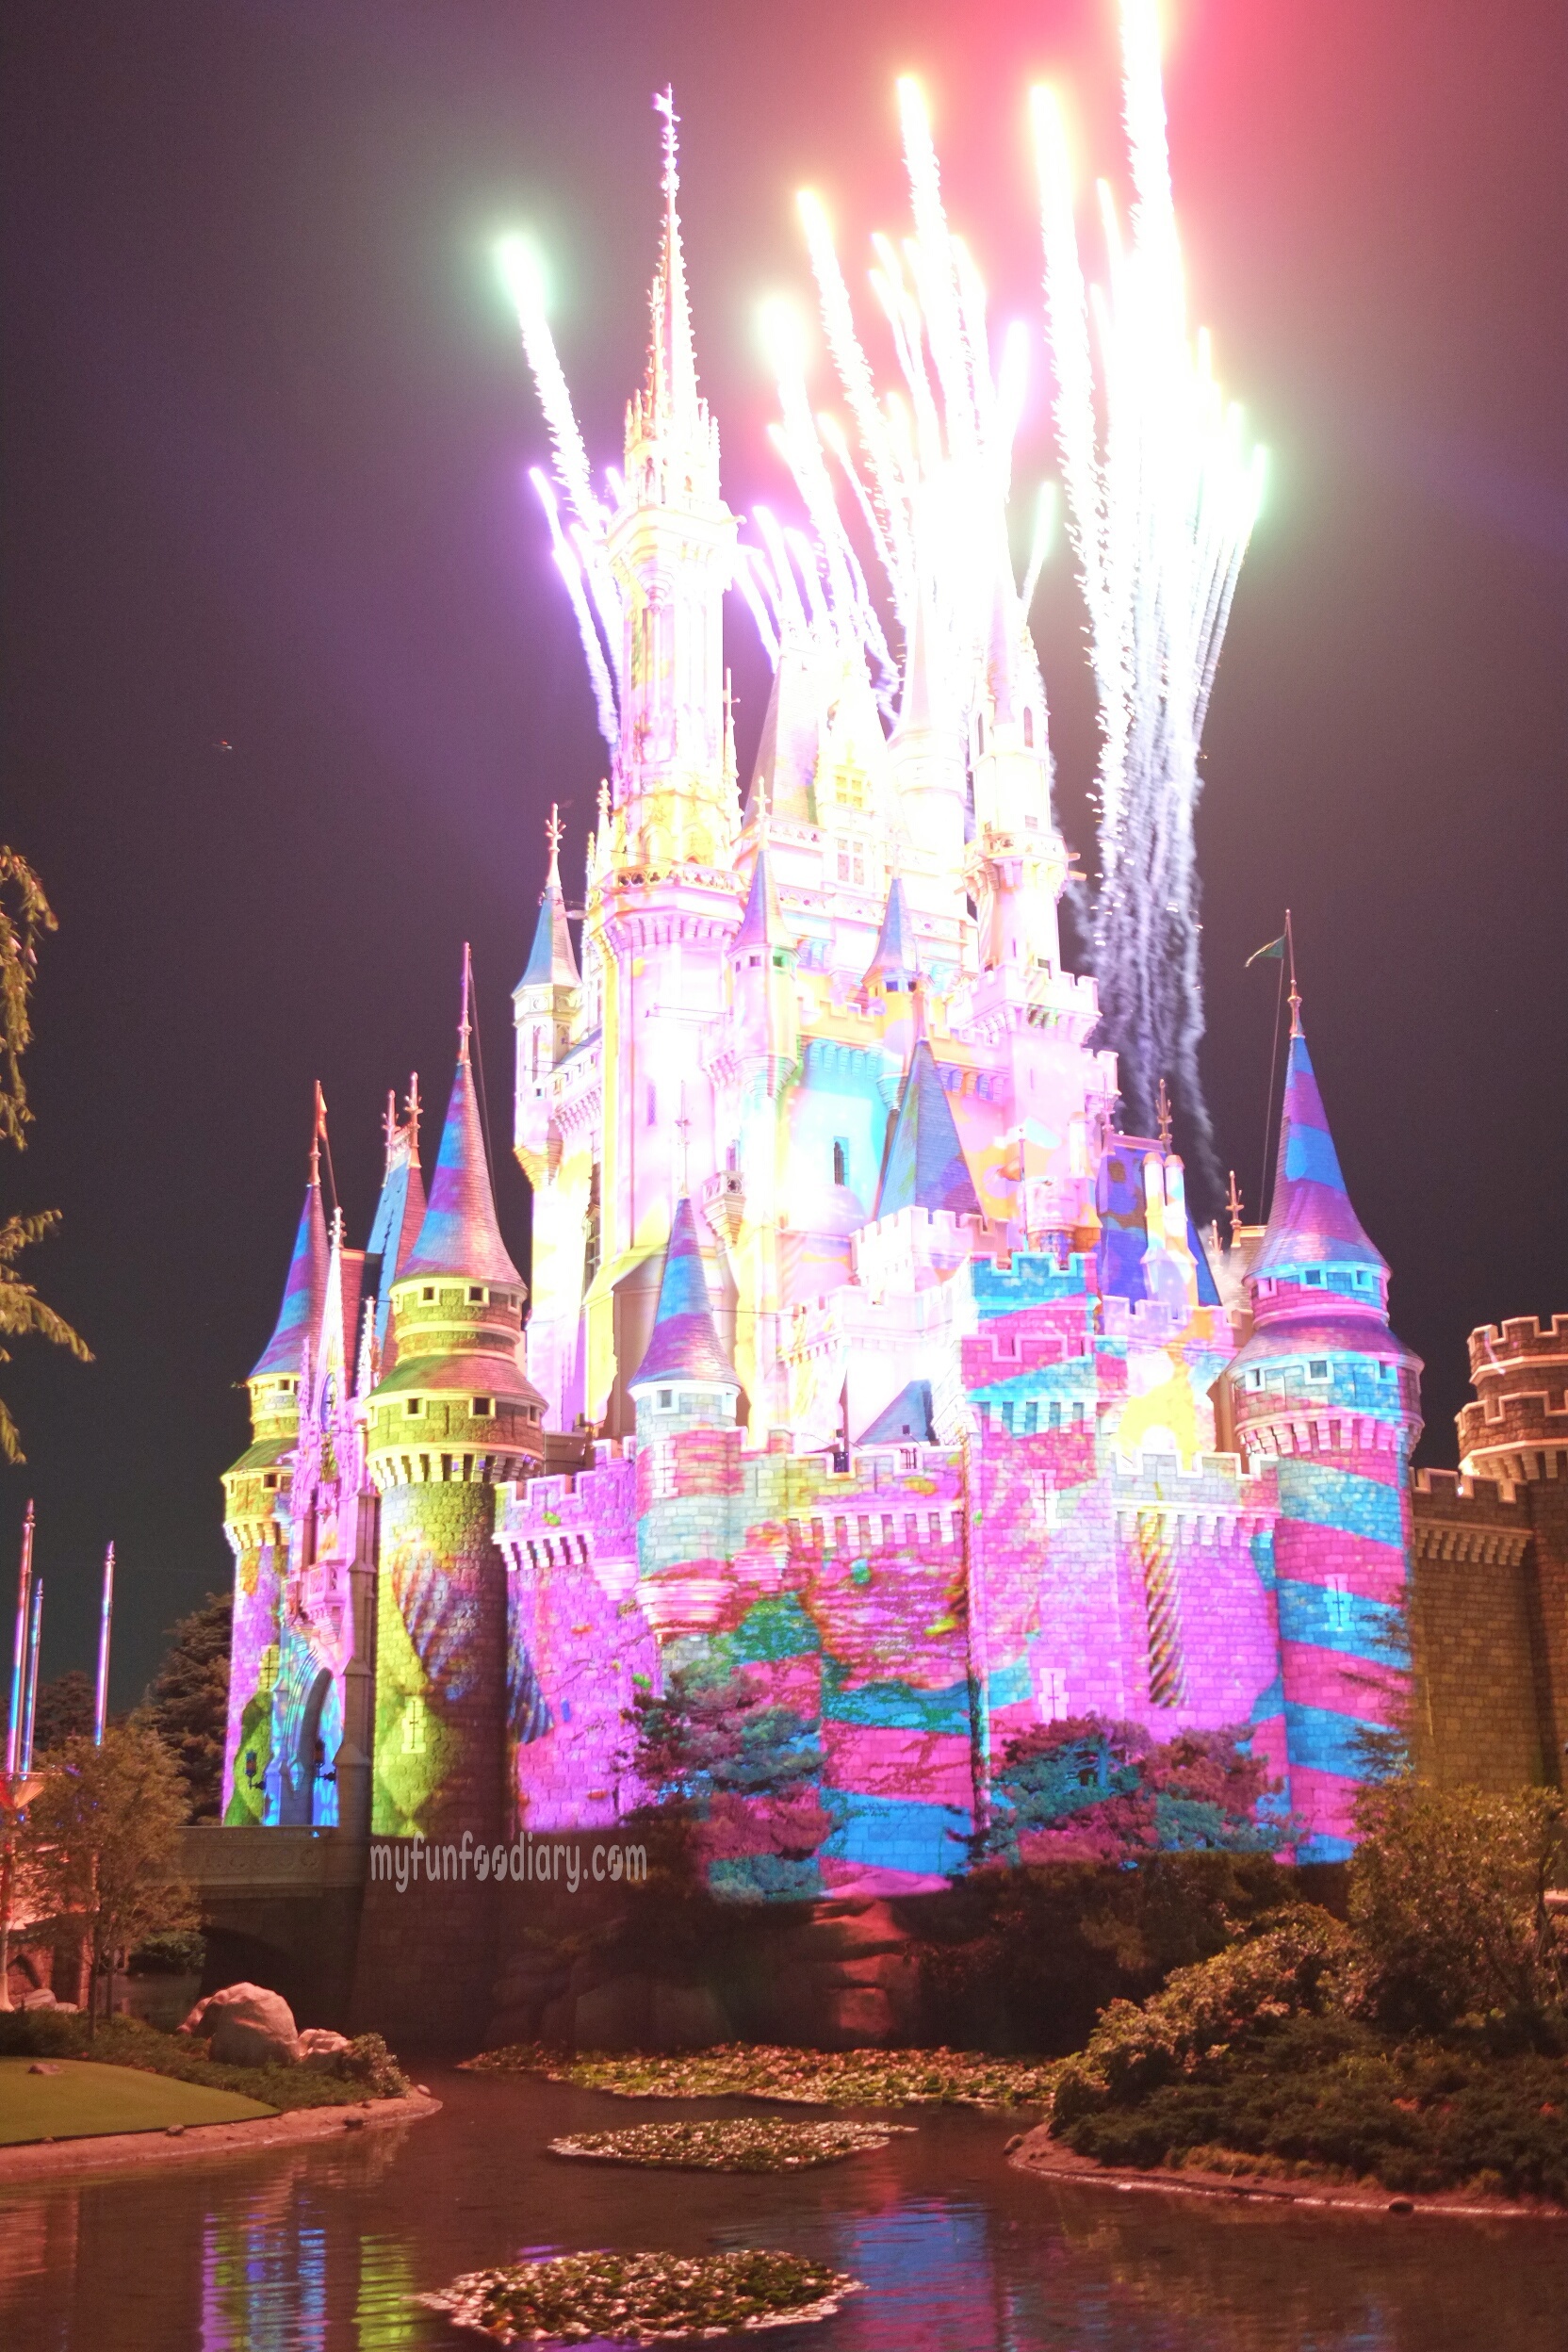 3D Mapping on Cinderella Castle at Tokyo Disneyland by Myfunfoodiary 01